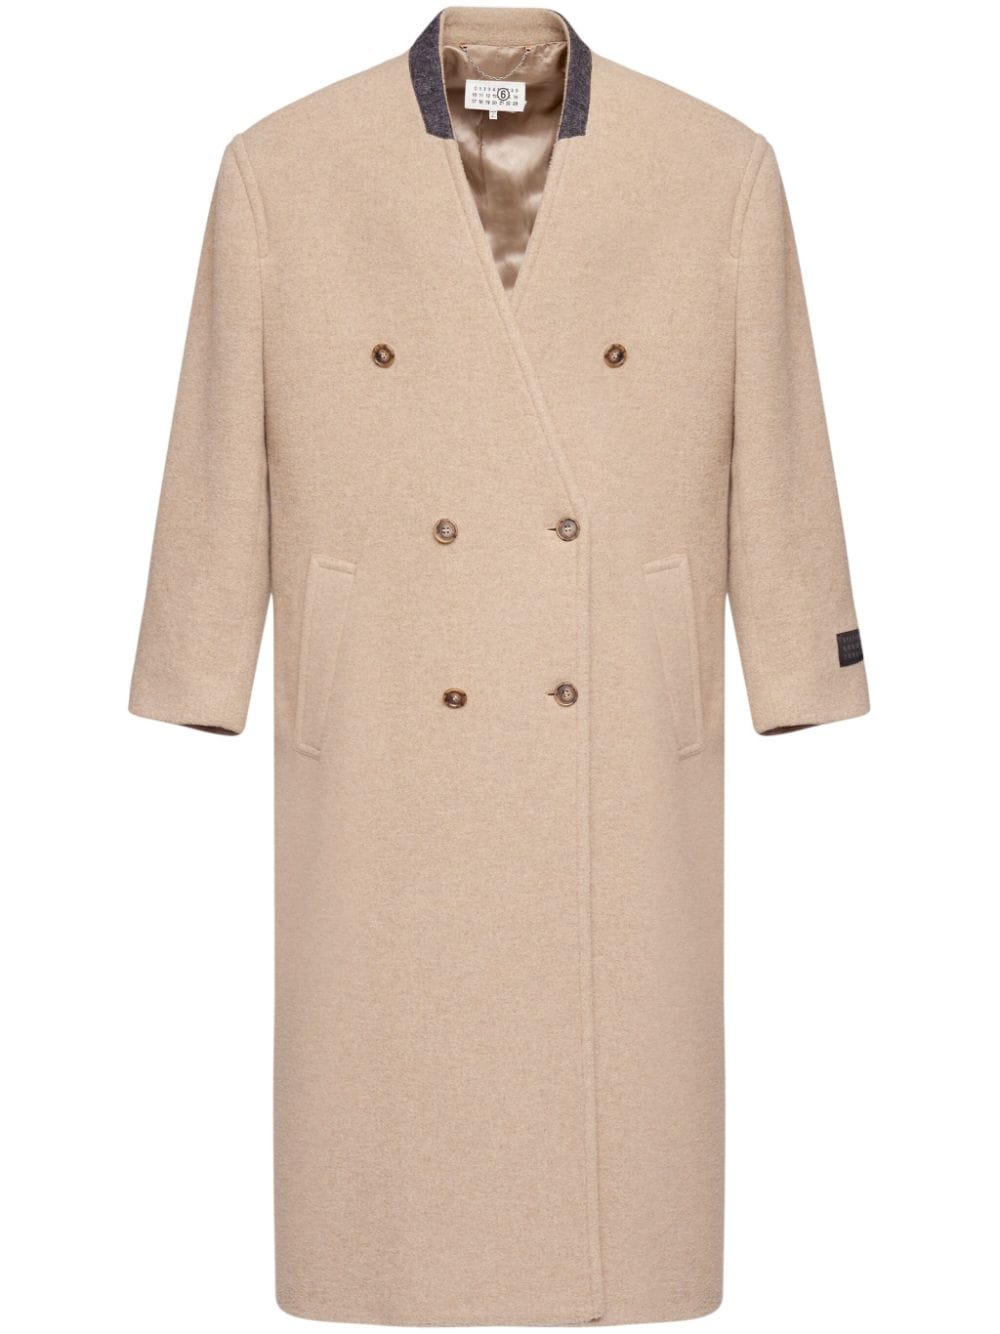 MM6 Maison Margiela numbers-appliqué double-breasted coat - Nude